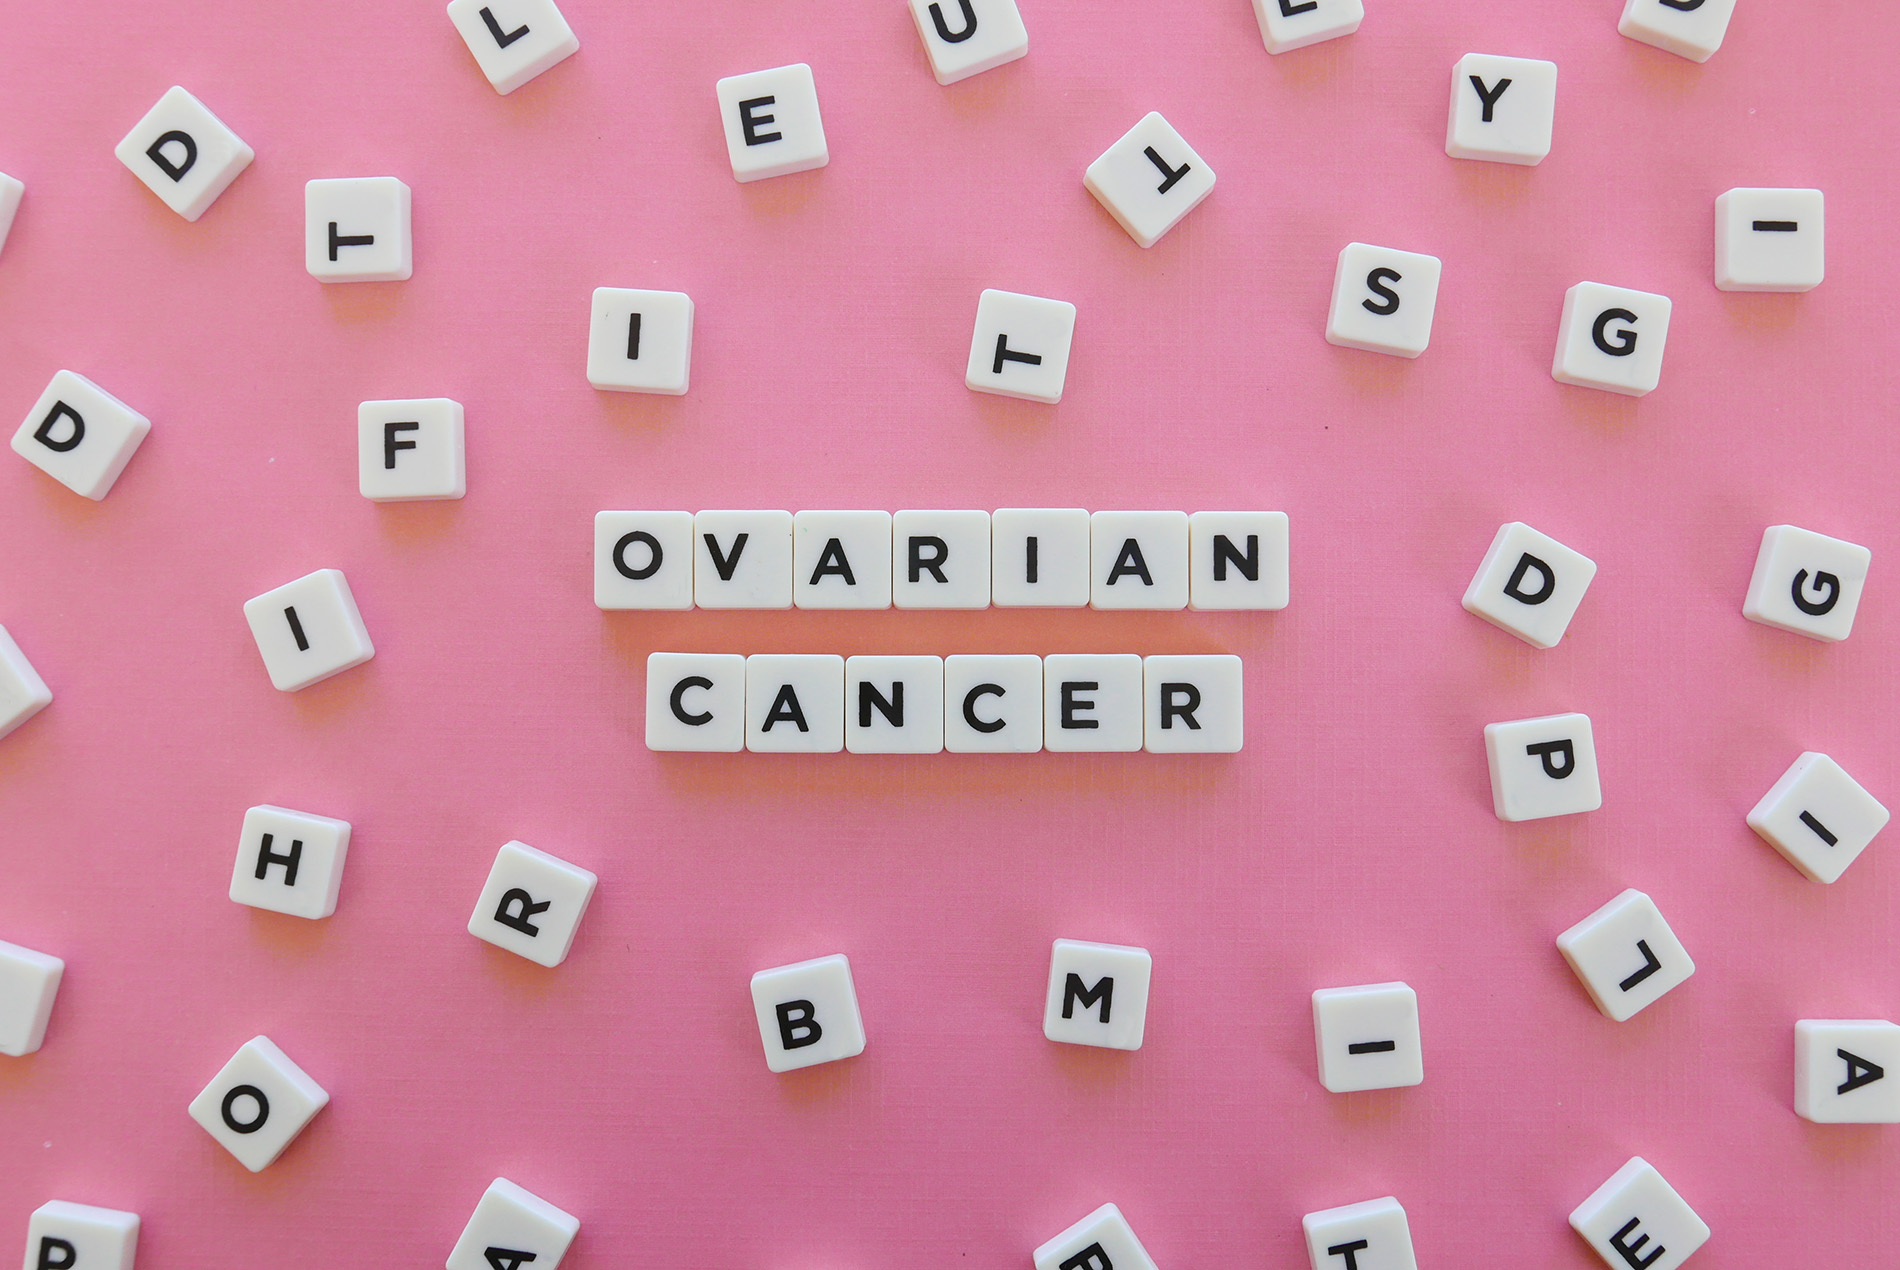 Ovarian cancer spelled out on pink background